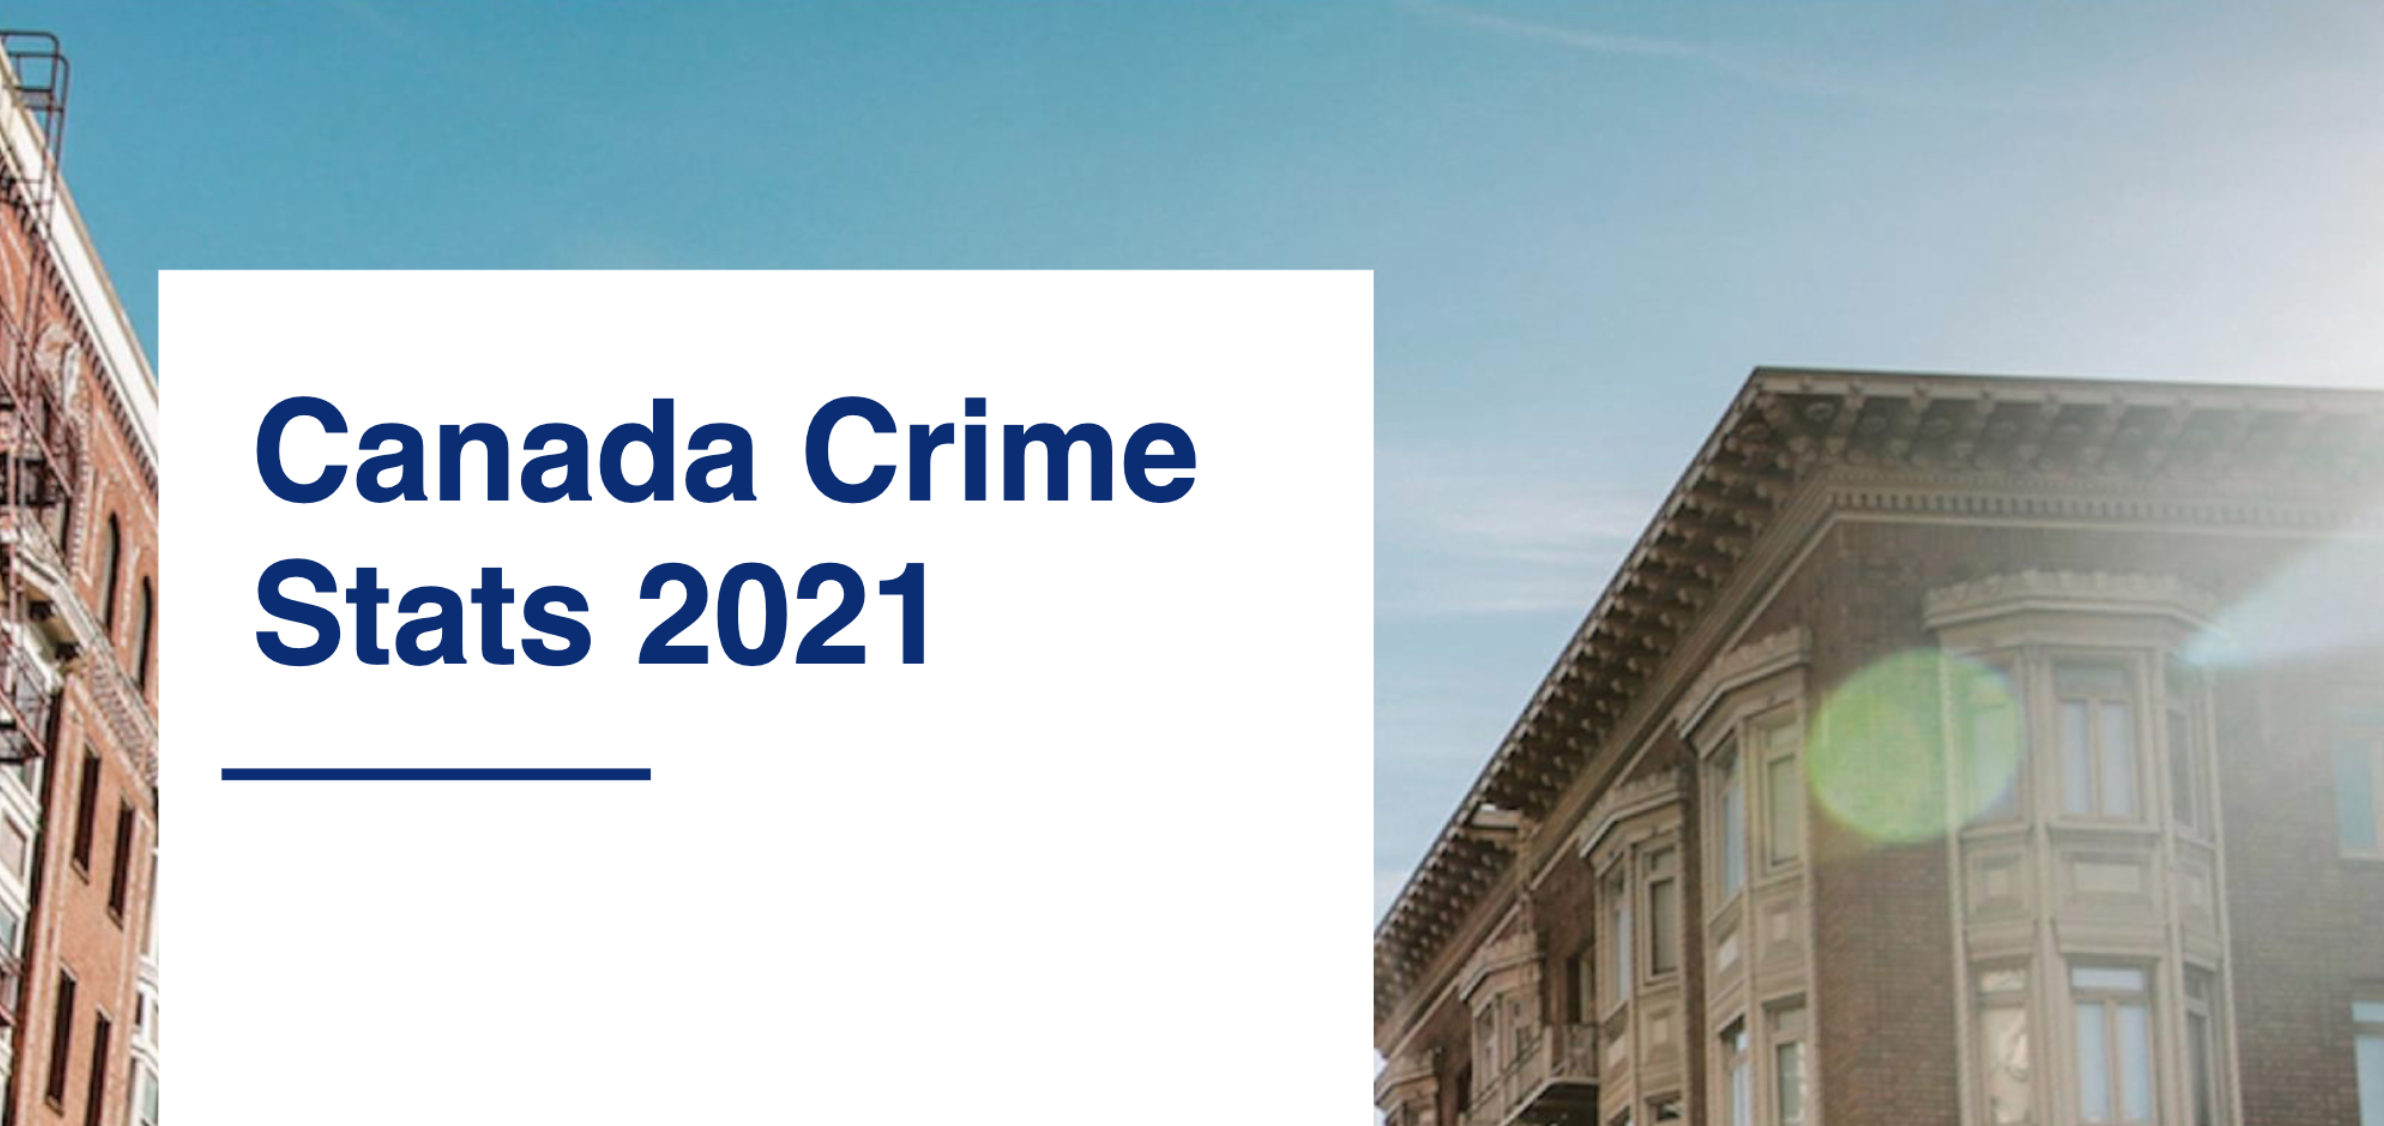 Analysis of Canada Crime Statistics - Reporting Project